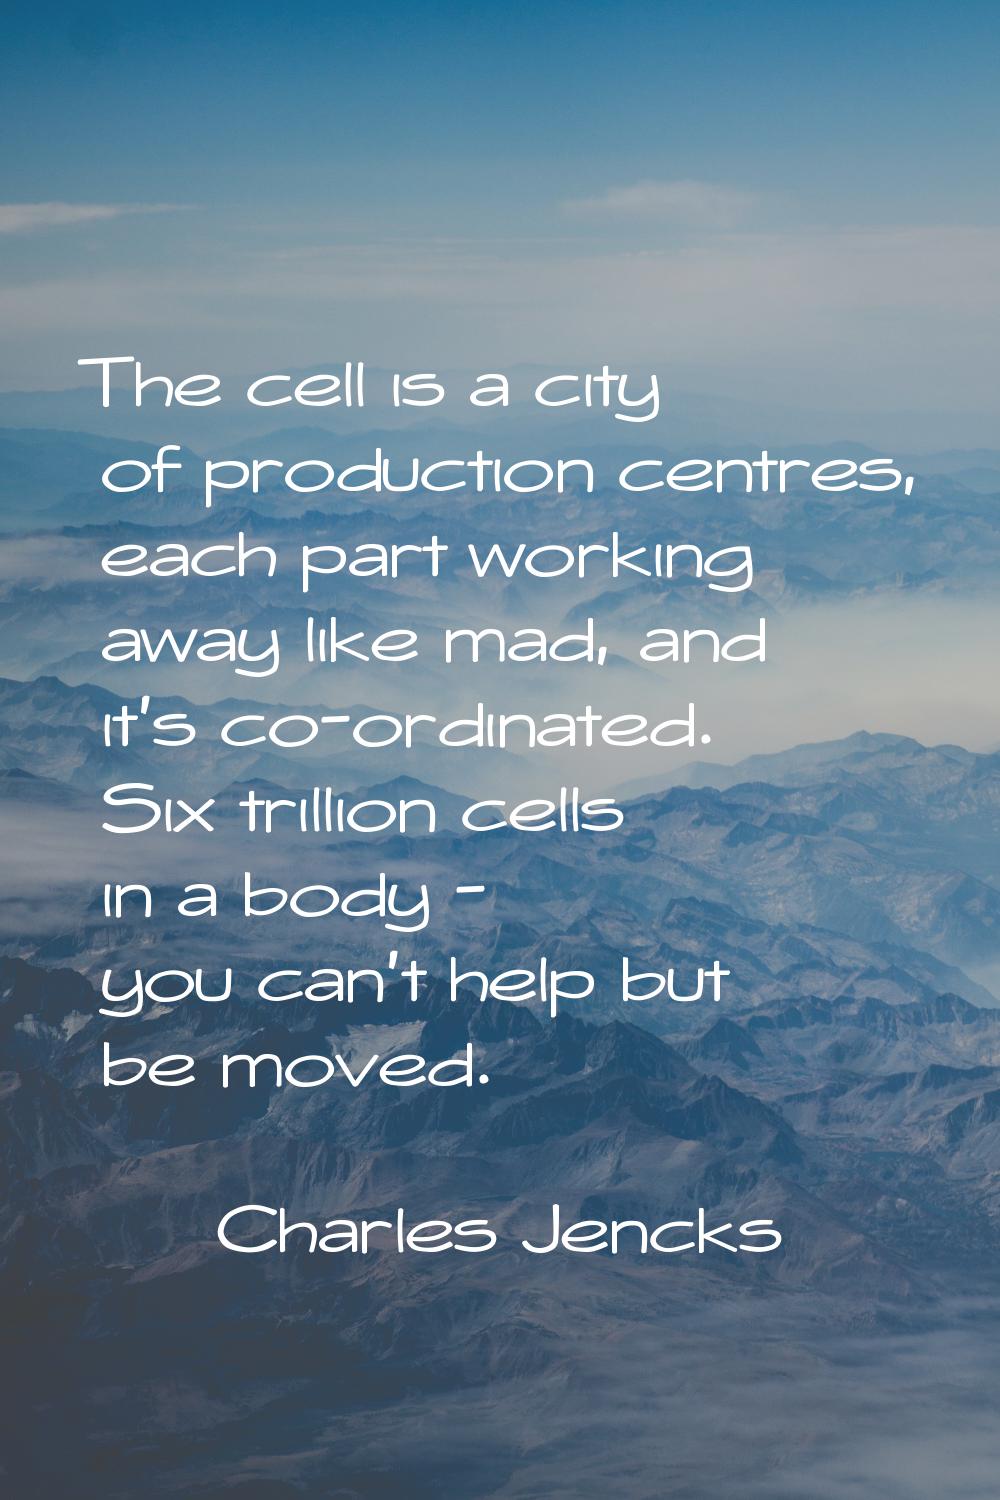 The cell is a city of production centres, each part working away like mad, and it's co-ordinated. S